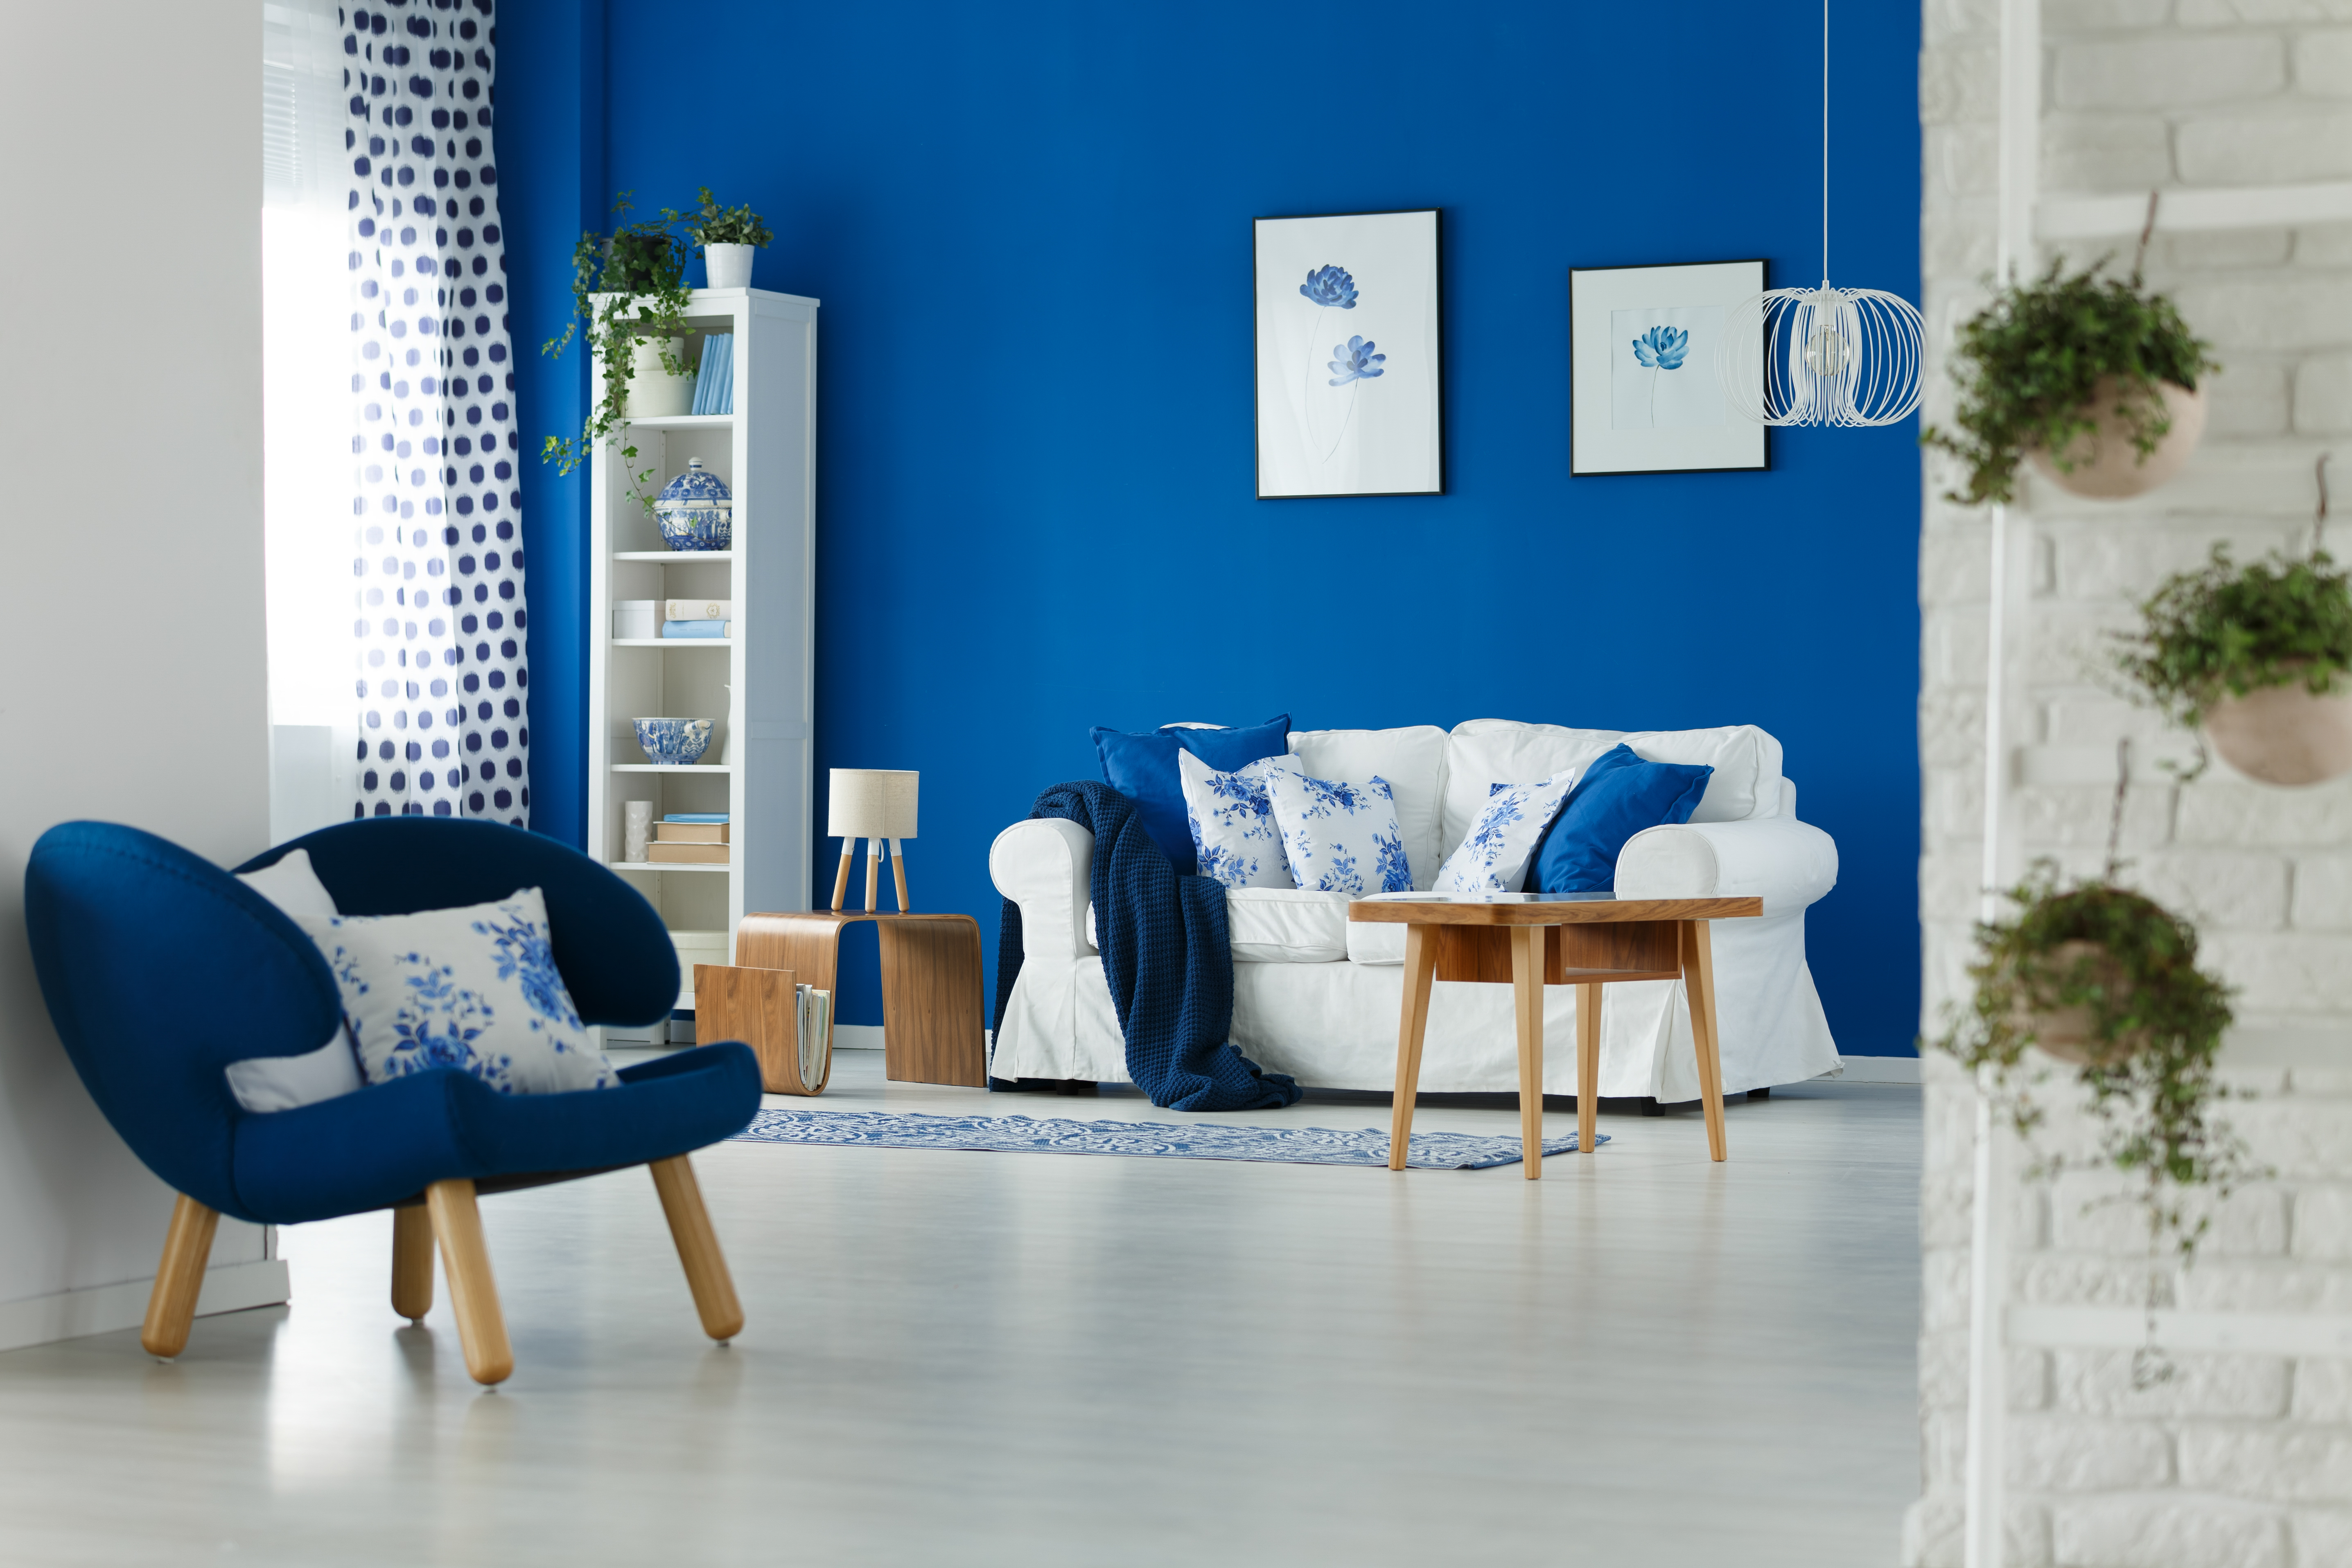 Decorated living room with blue accents